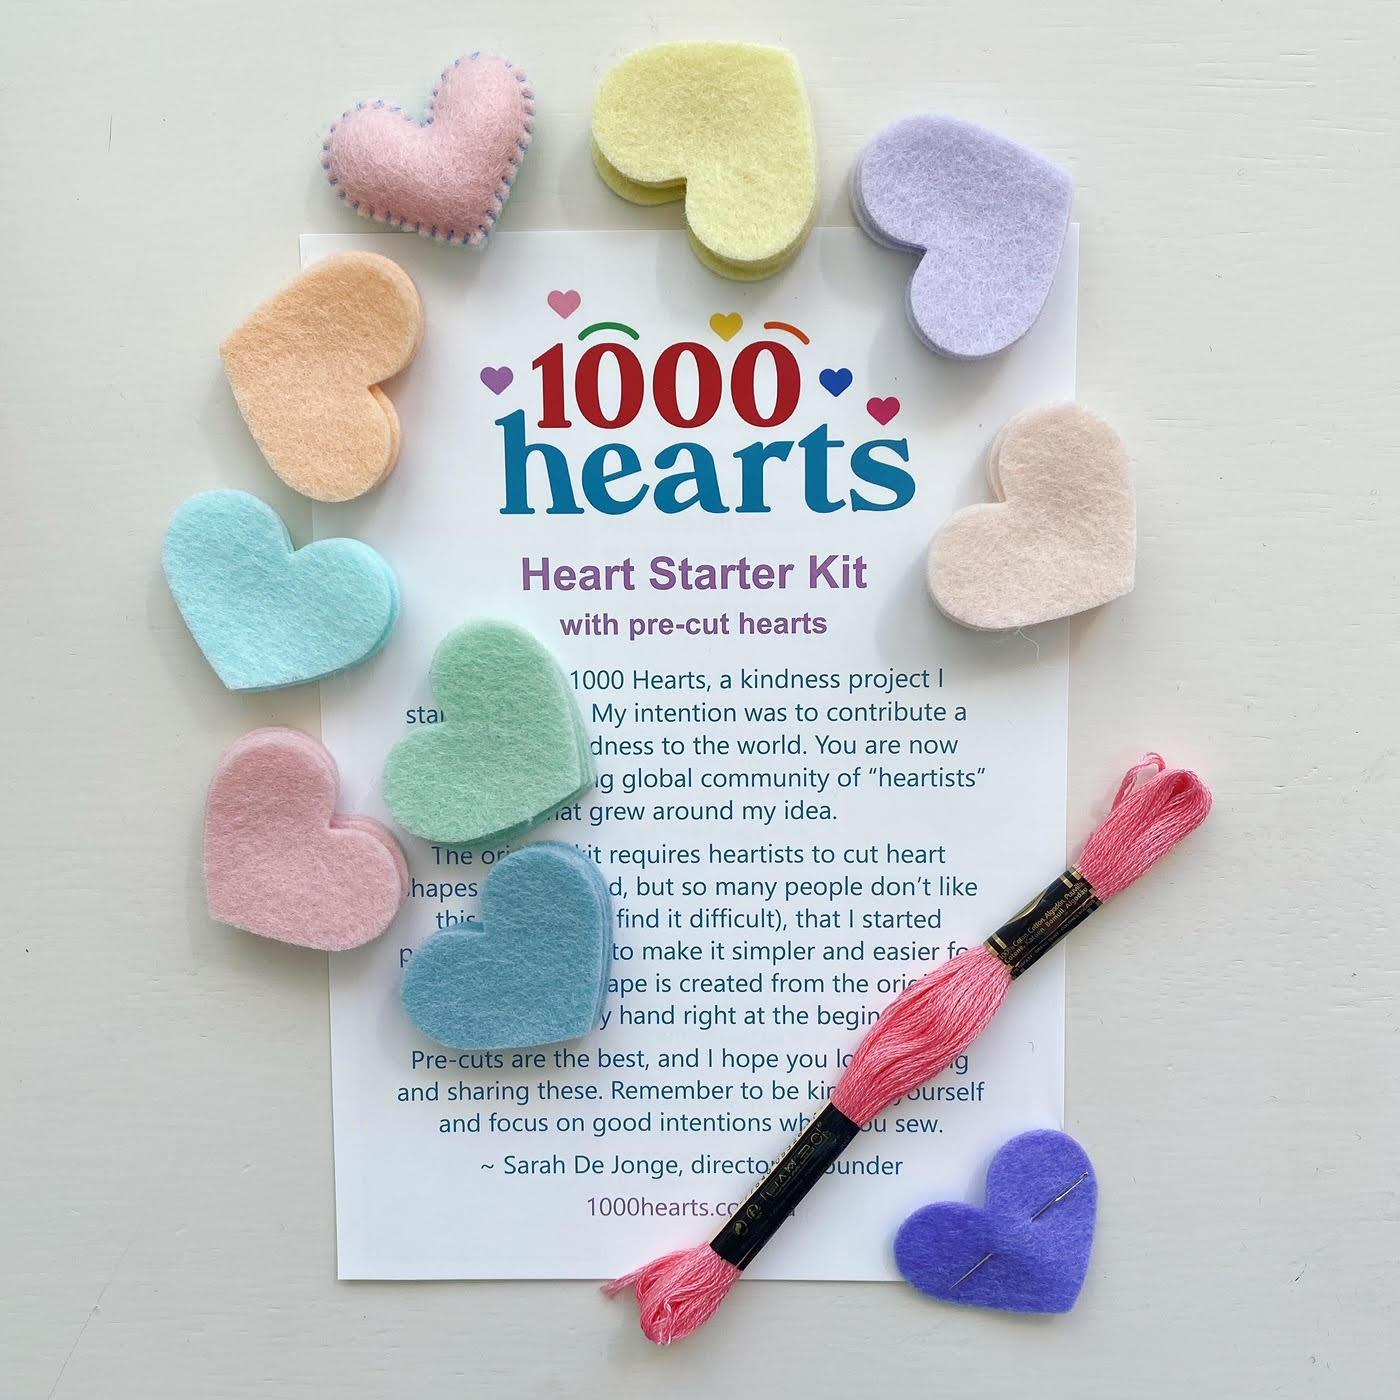 Heart Starter Kit with pre-cut hearts